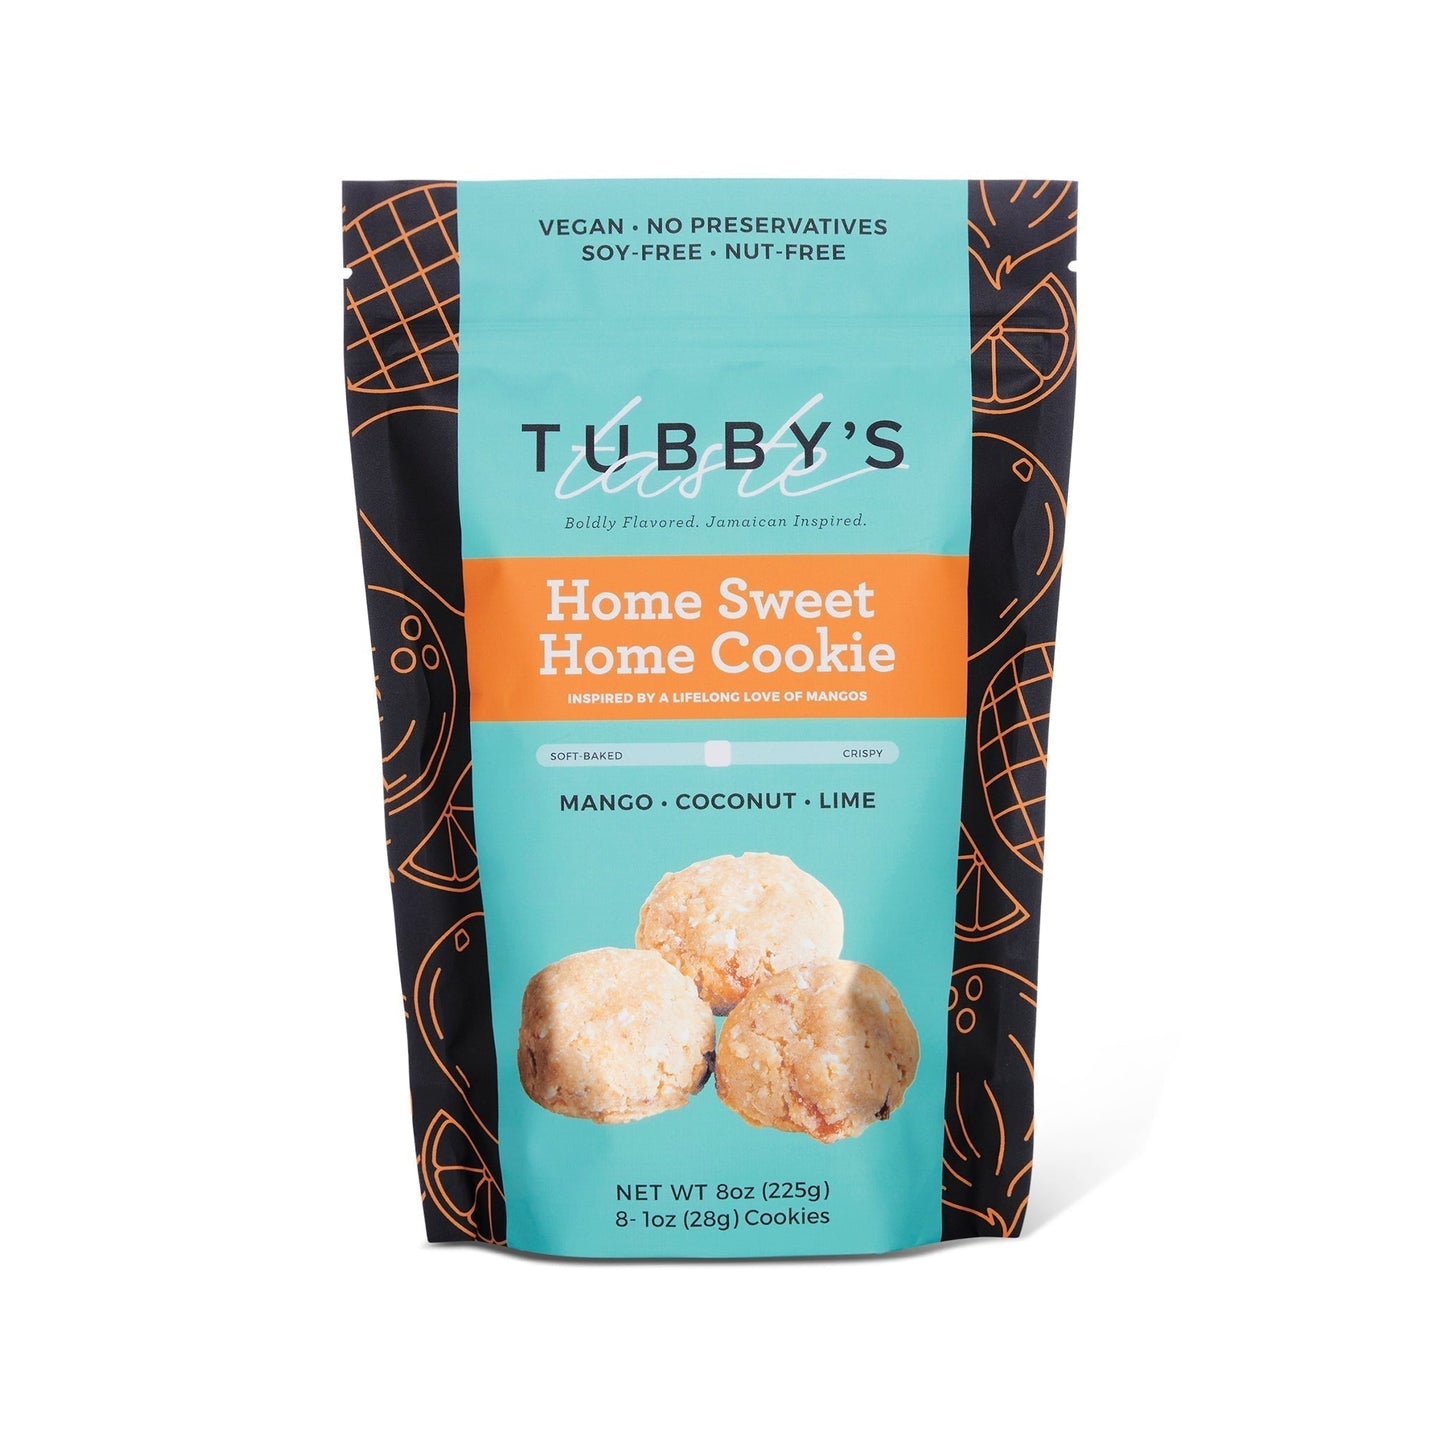 A bag of Tubby's Taste Mango Coconut Lime cookies labeled Home Sweet Home on a white background.